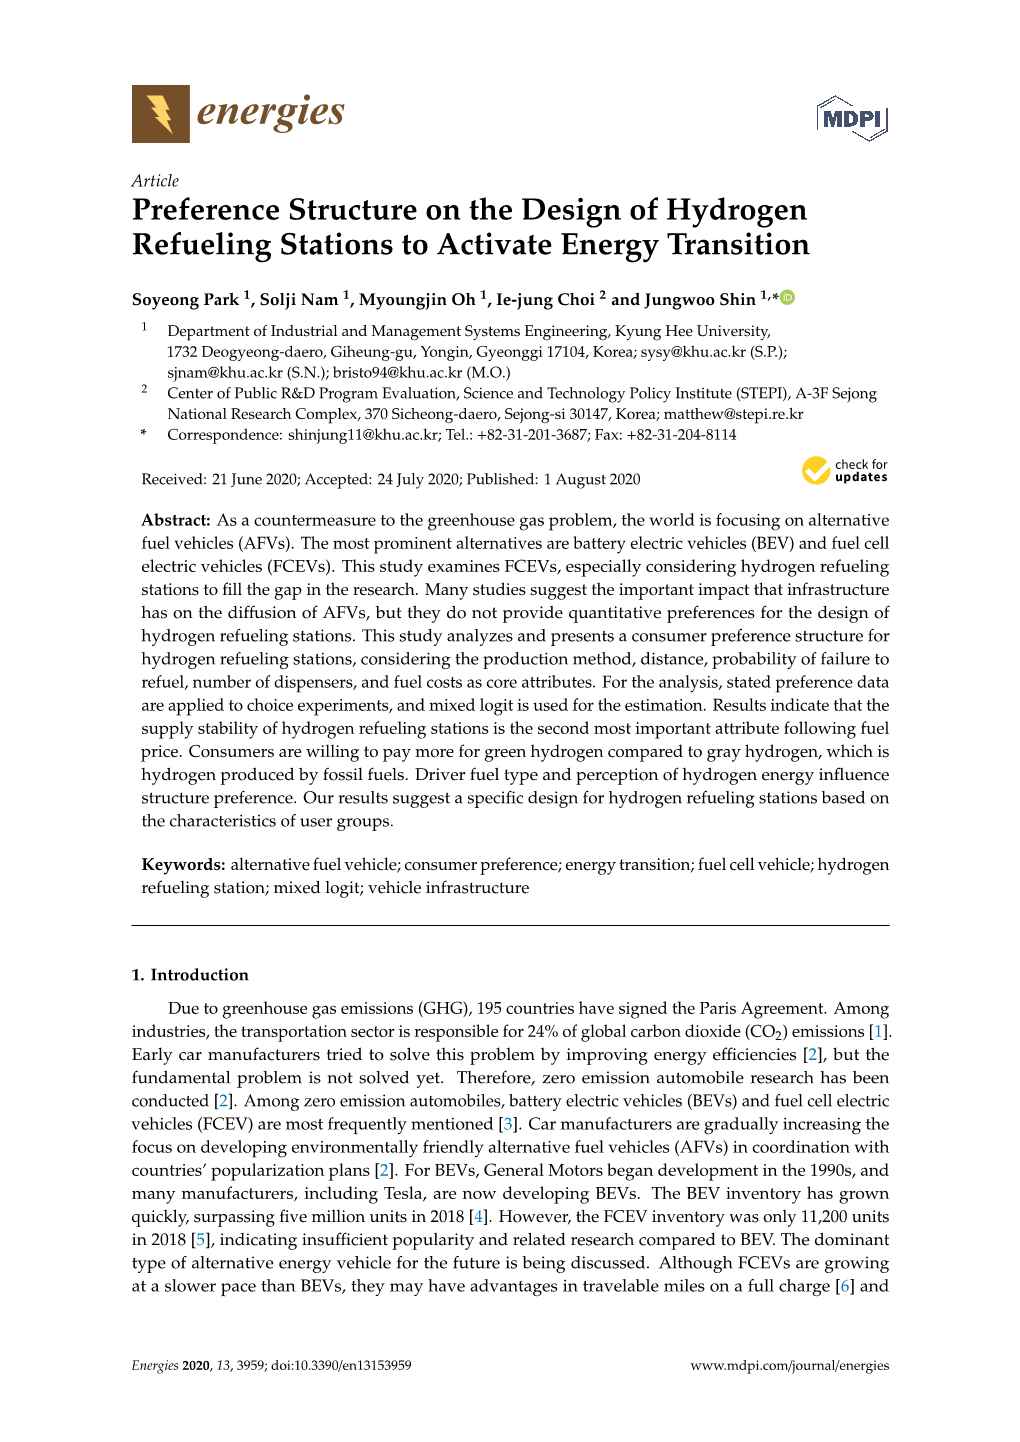 Preference Structure on the Design of Hydrogen Refueling Stations to Activate Energy Transition